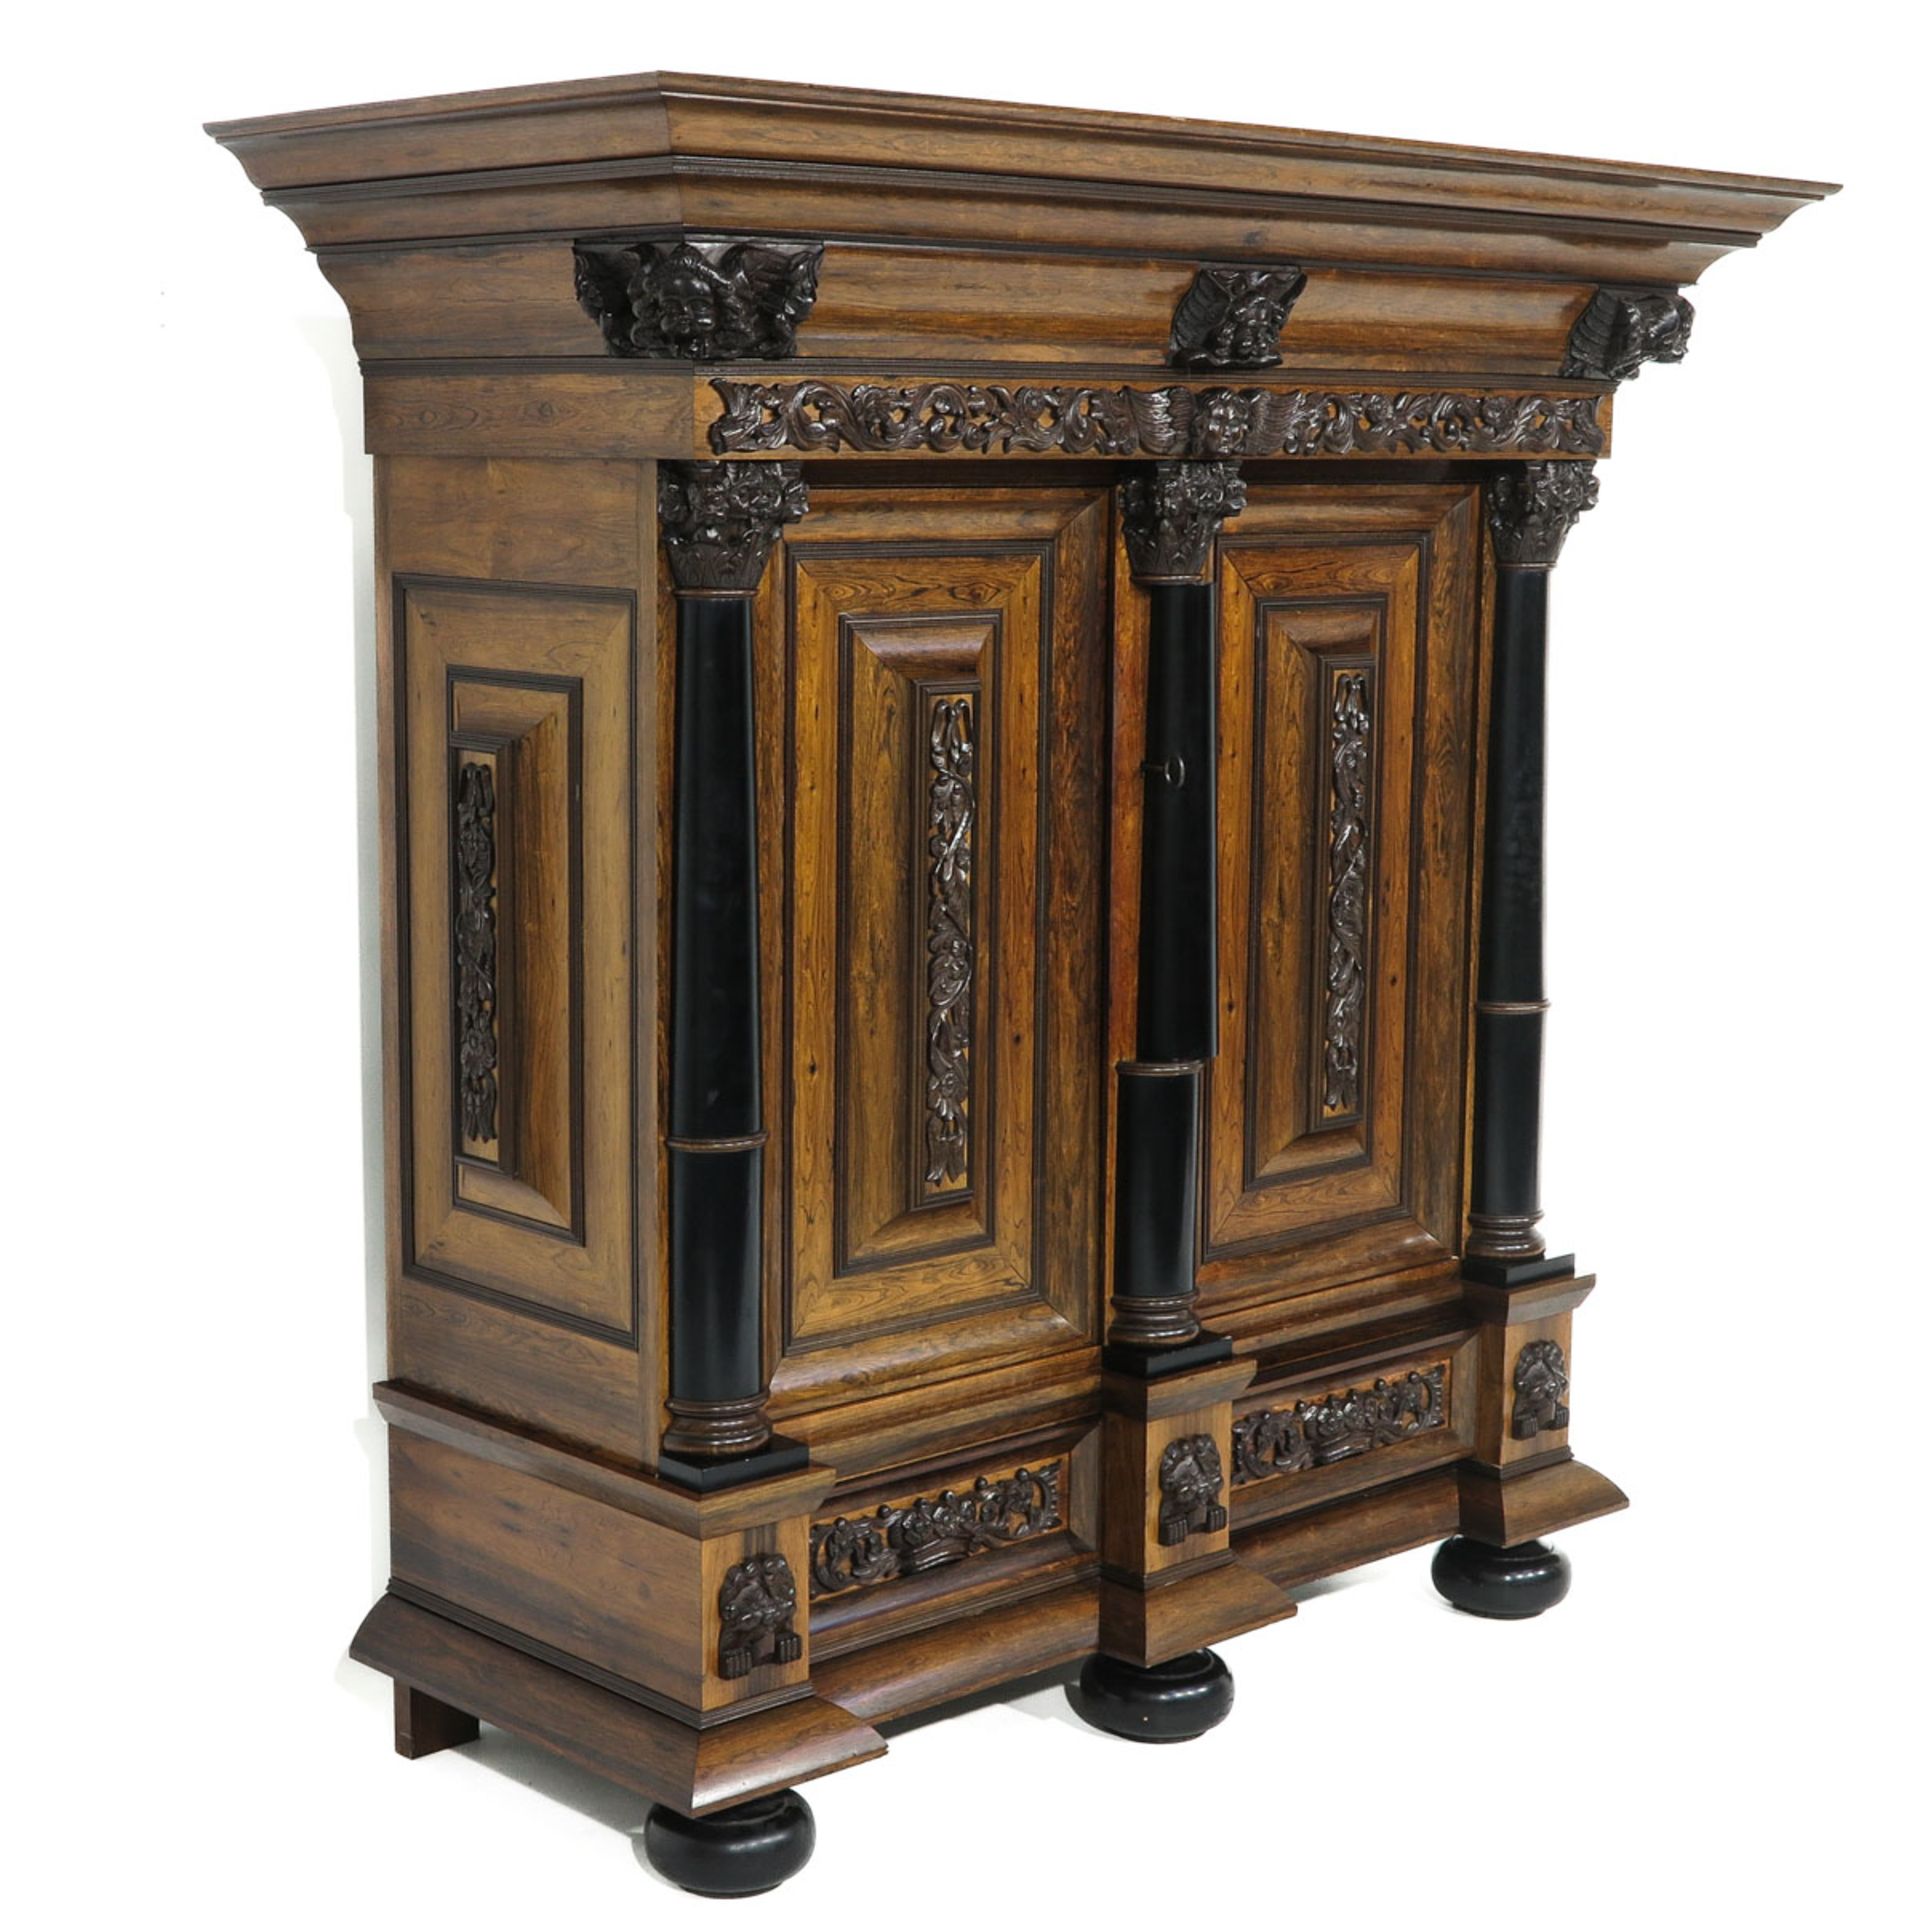 A Very Beautifully Carved Cabinet or Kussenkast - Image 2 of 10